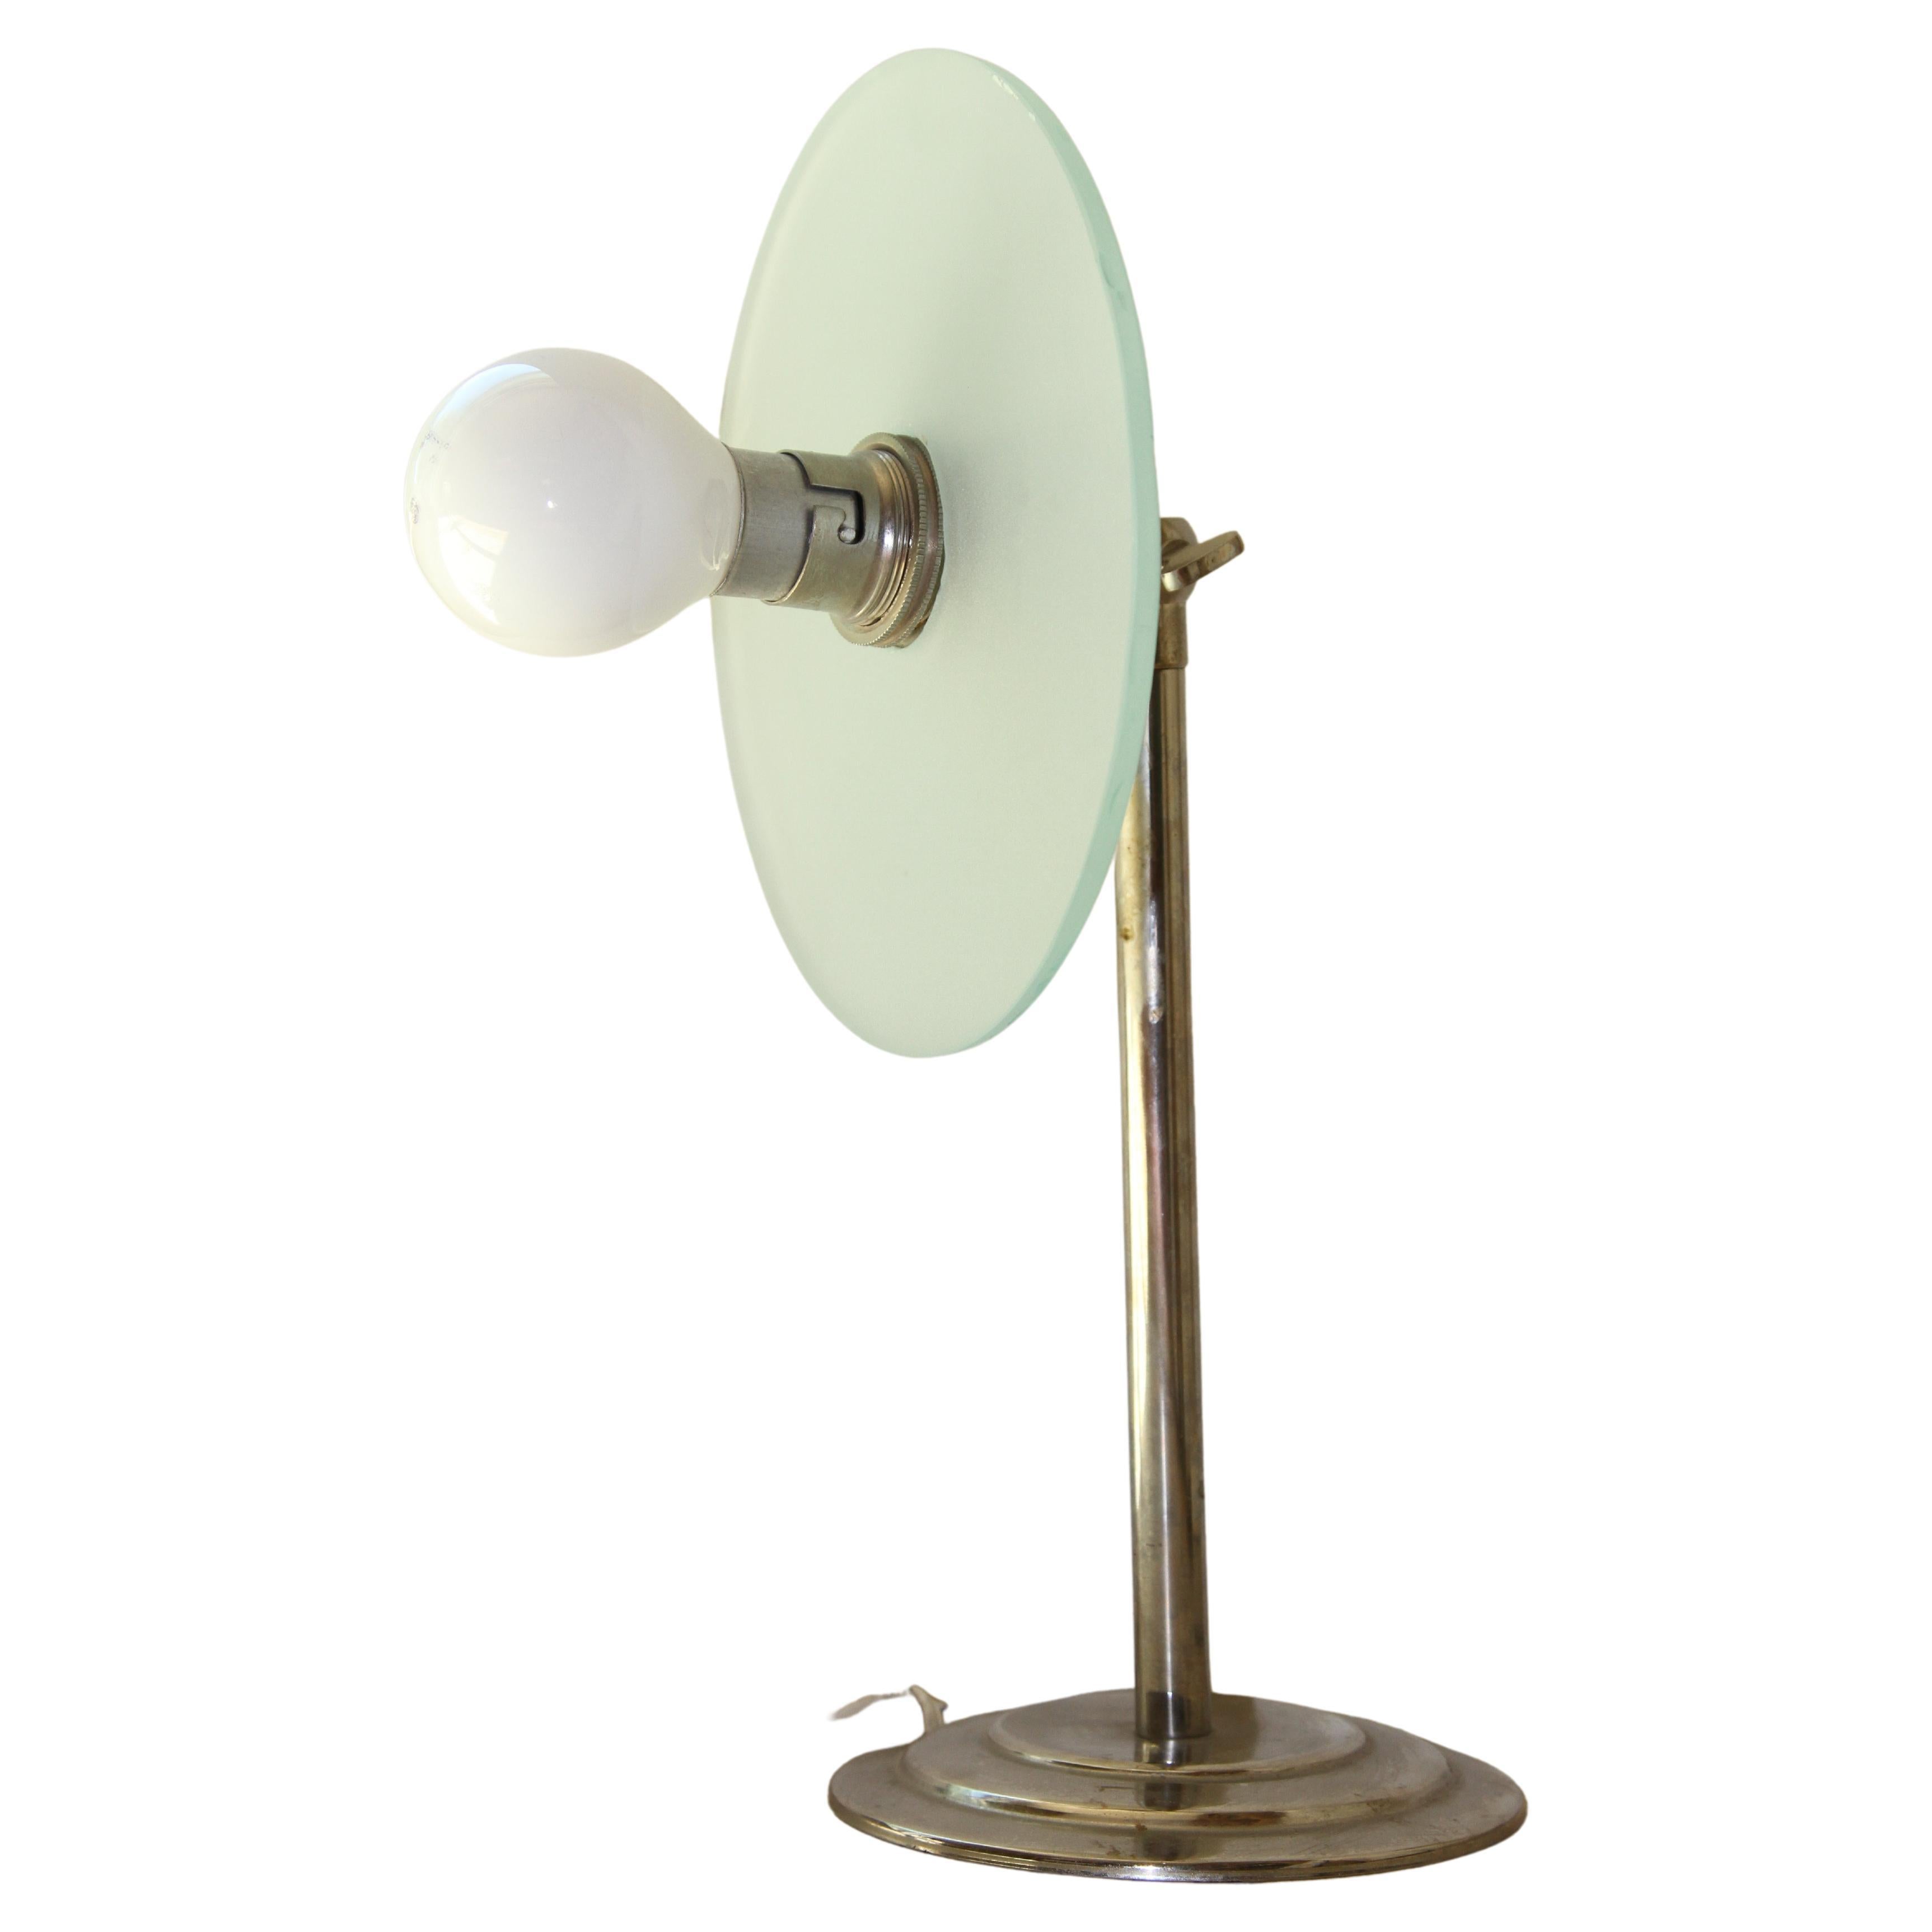 Rare pair of chrome Art-Deco or mid-century table lamp, with disc of frosted glass, in great order and functioning comes with 5 ft of cord.
the pair of a leaded base, This would be a valuable addition to any library or office space.

